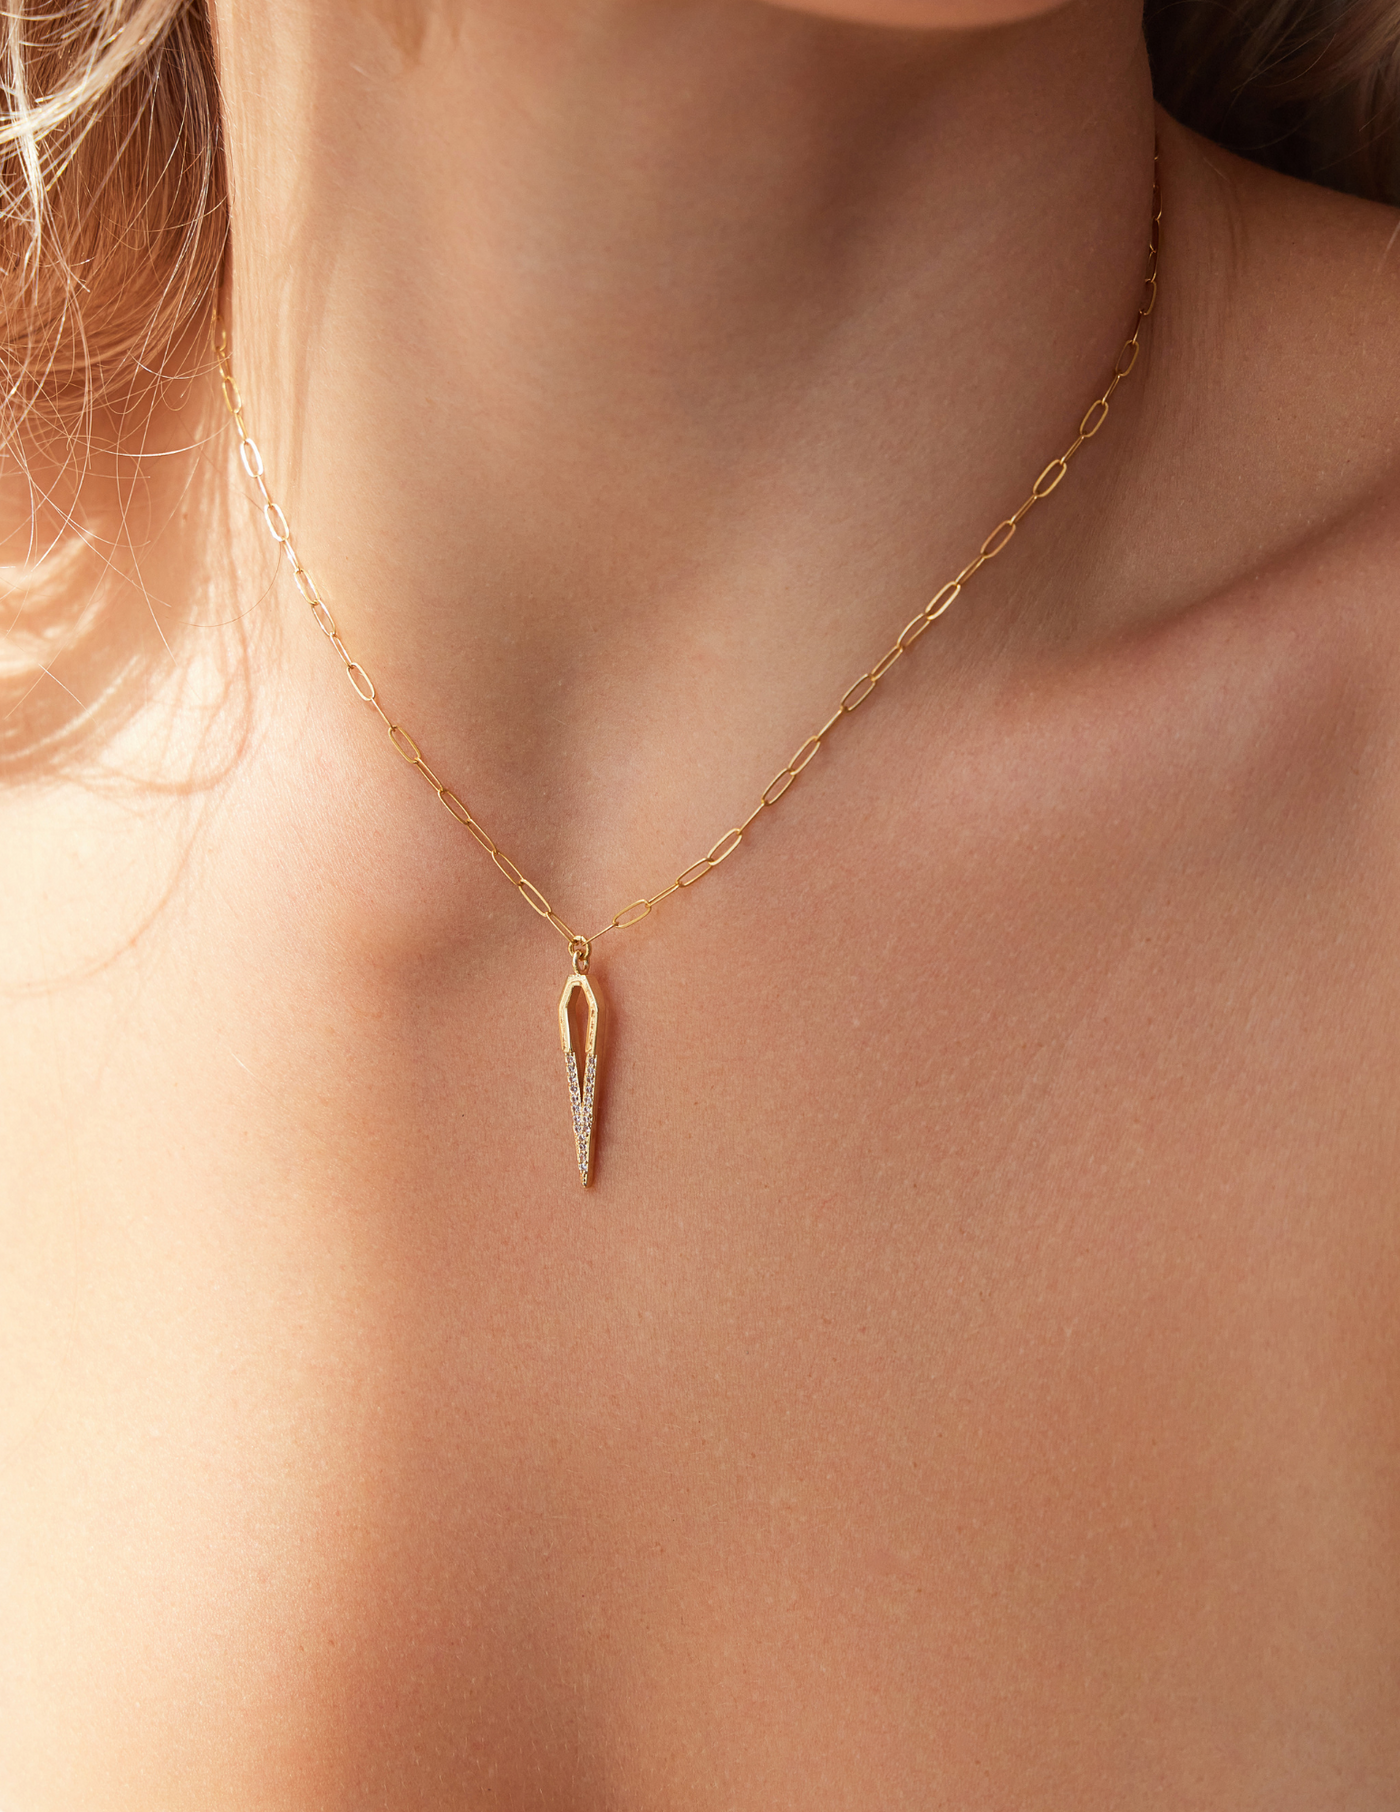 Cosmo Spike Necklace